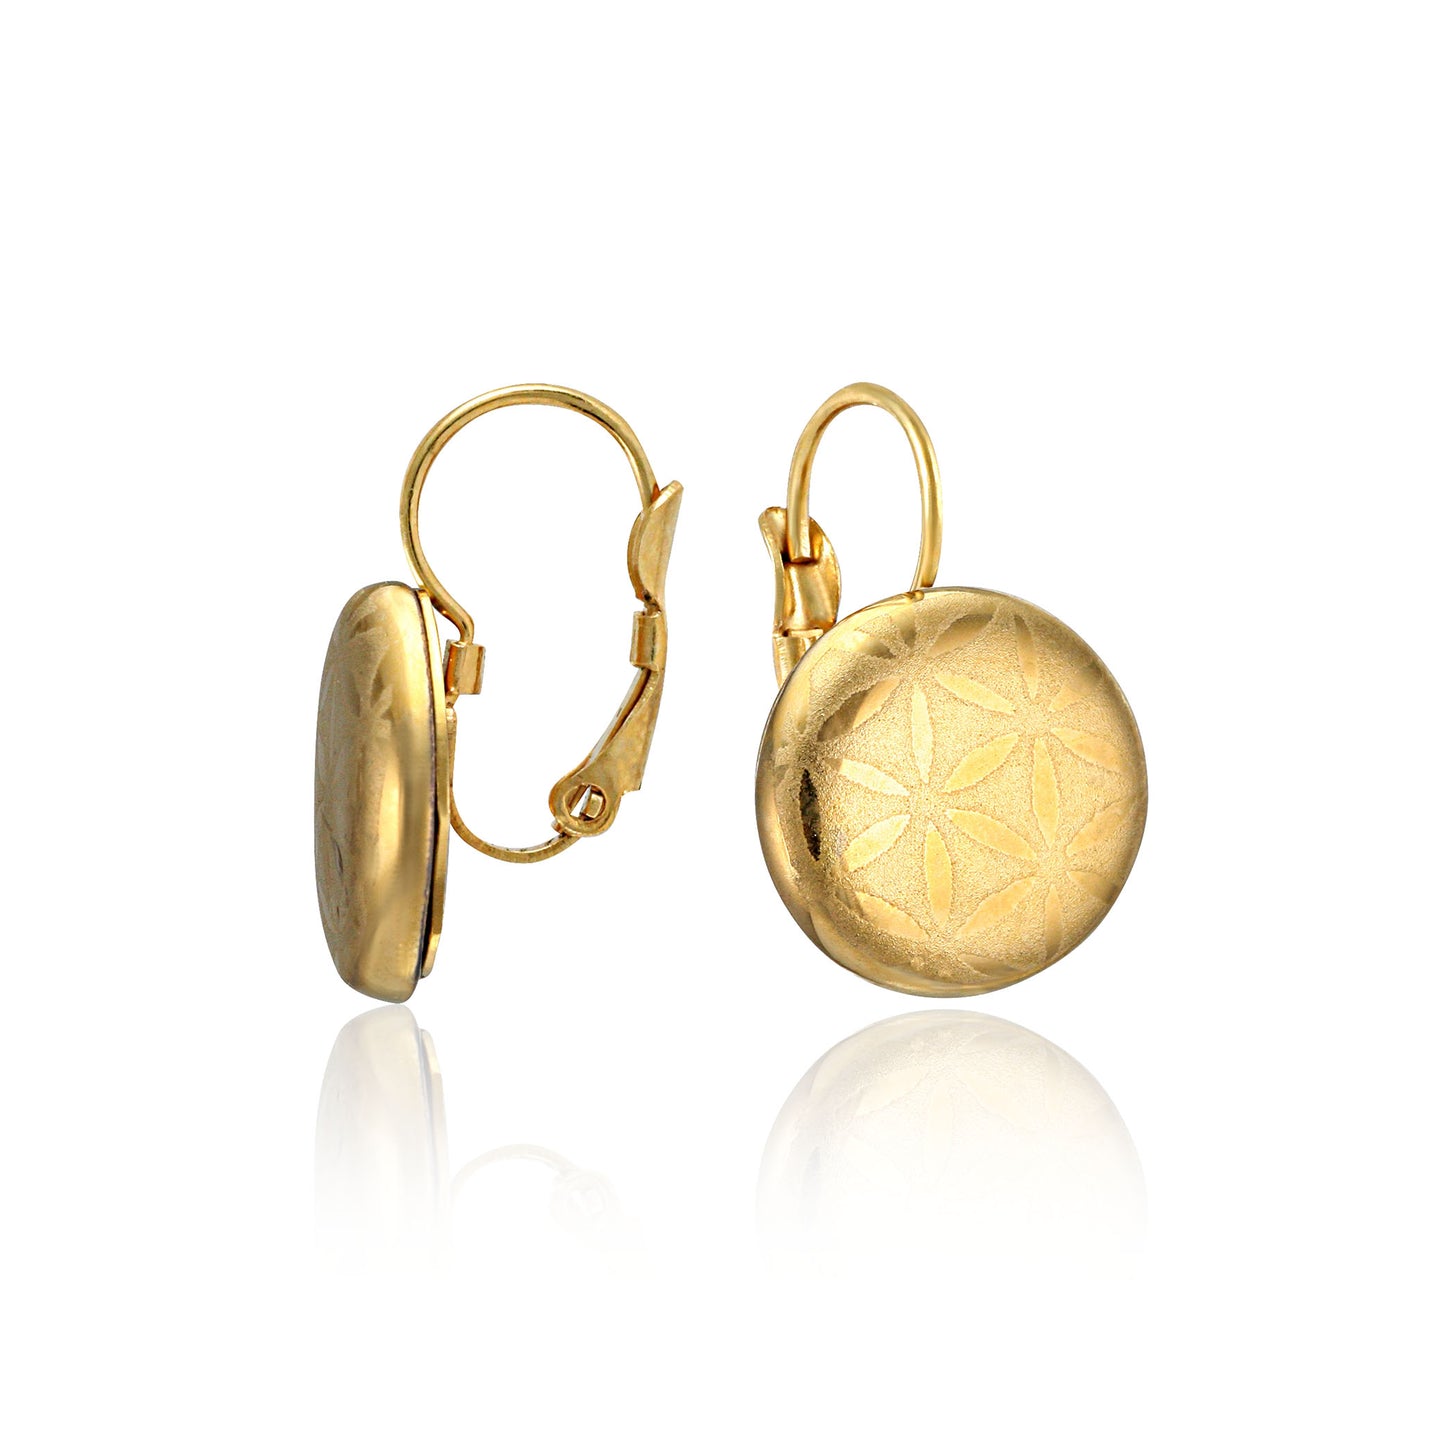 MINIMAL gold plated fine porcelain clasp earring set